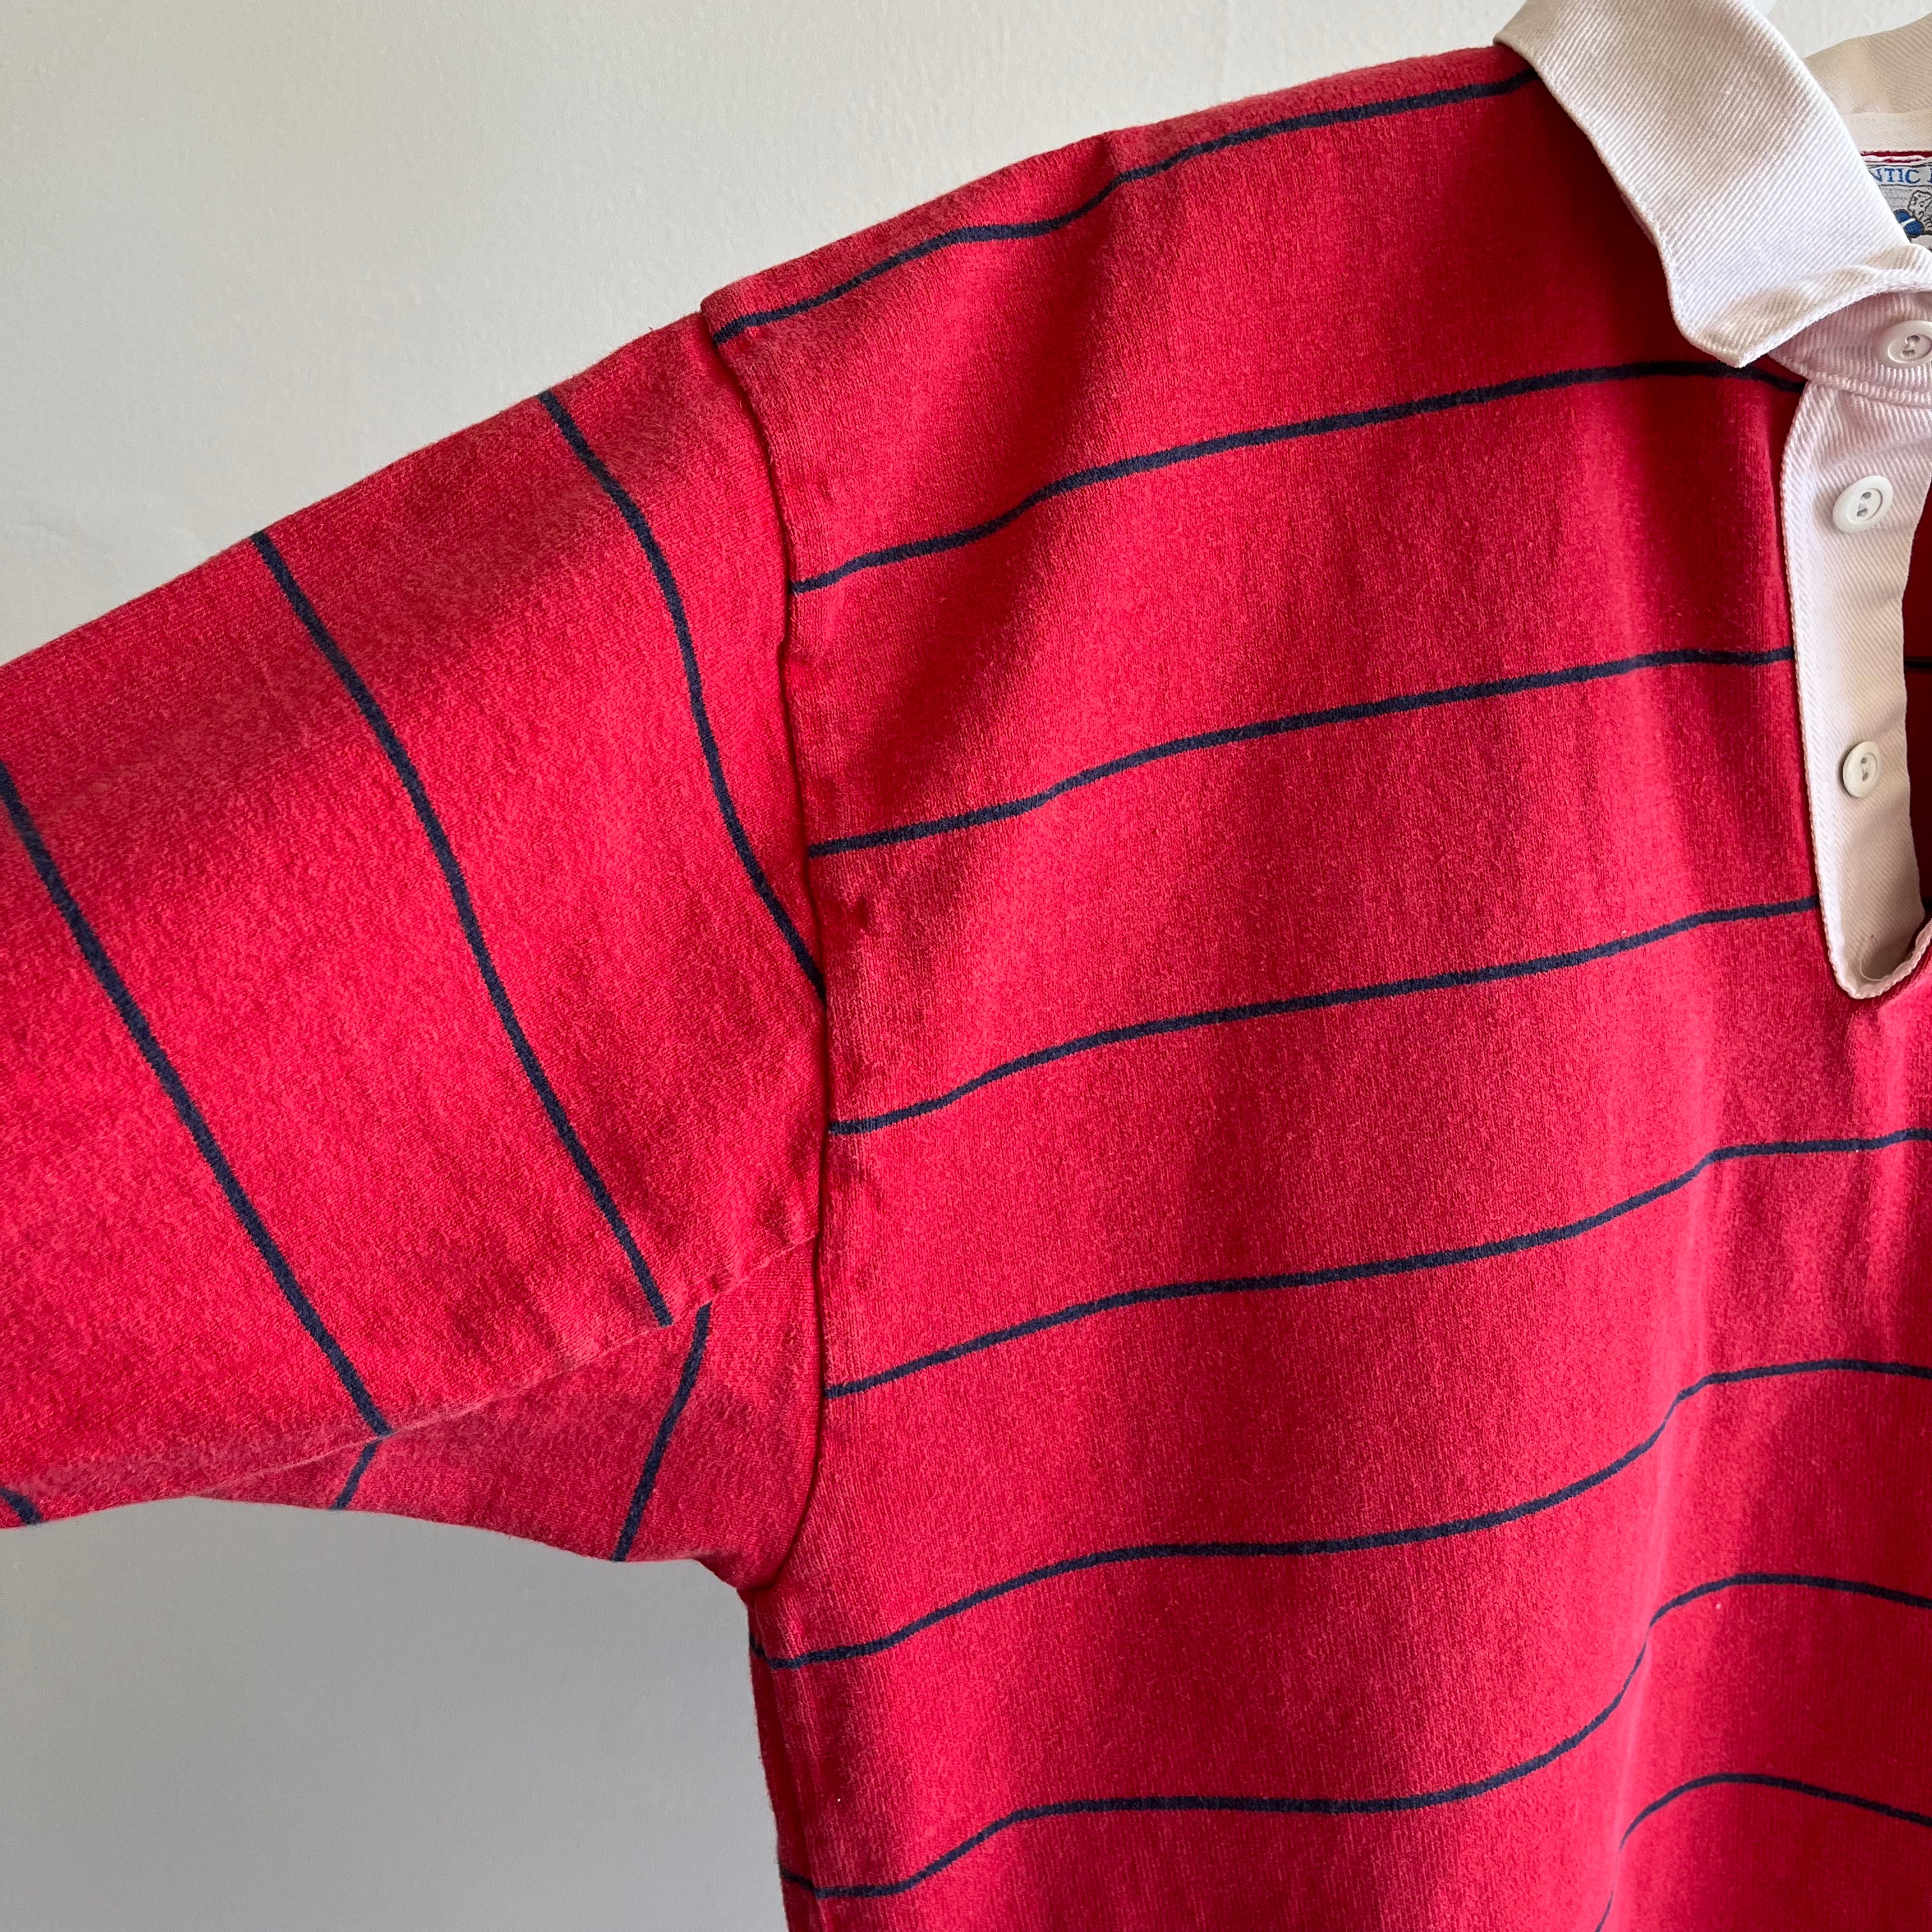 1980s/90s Lands' End Heavyweight Cotton Rugby Shirt